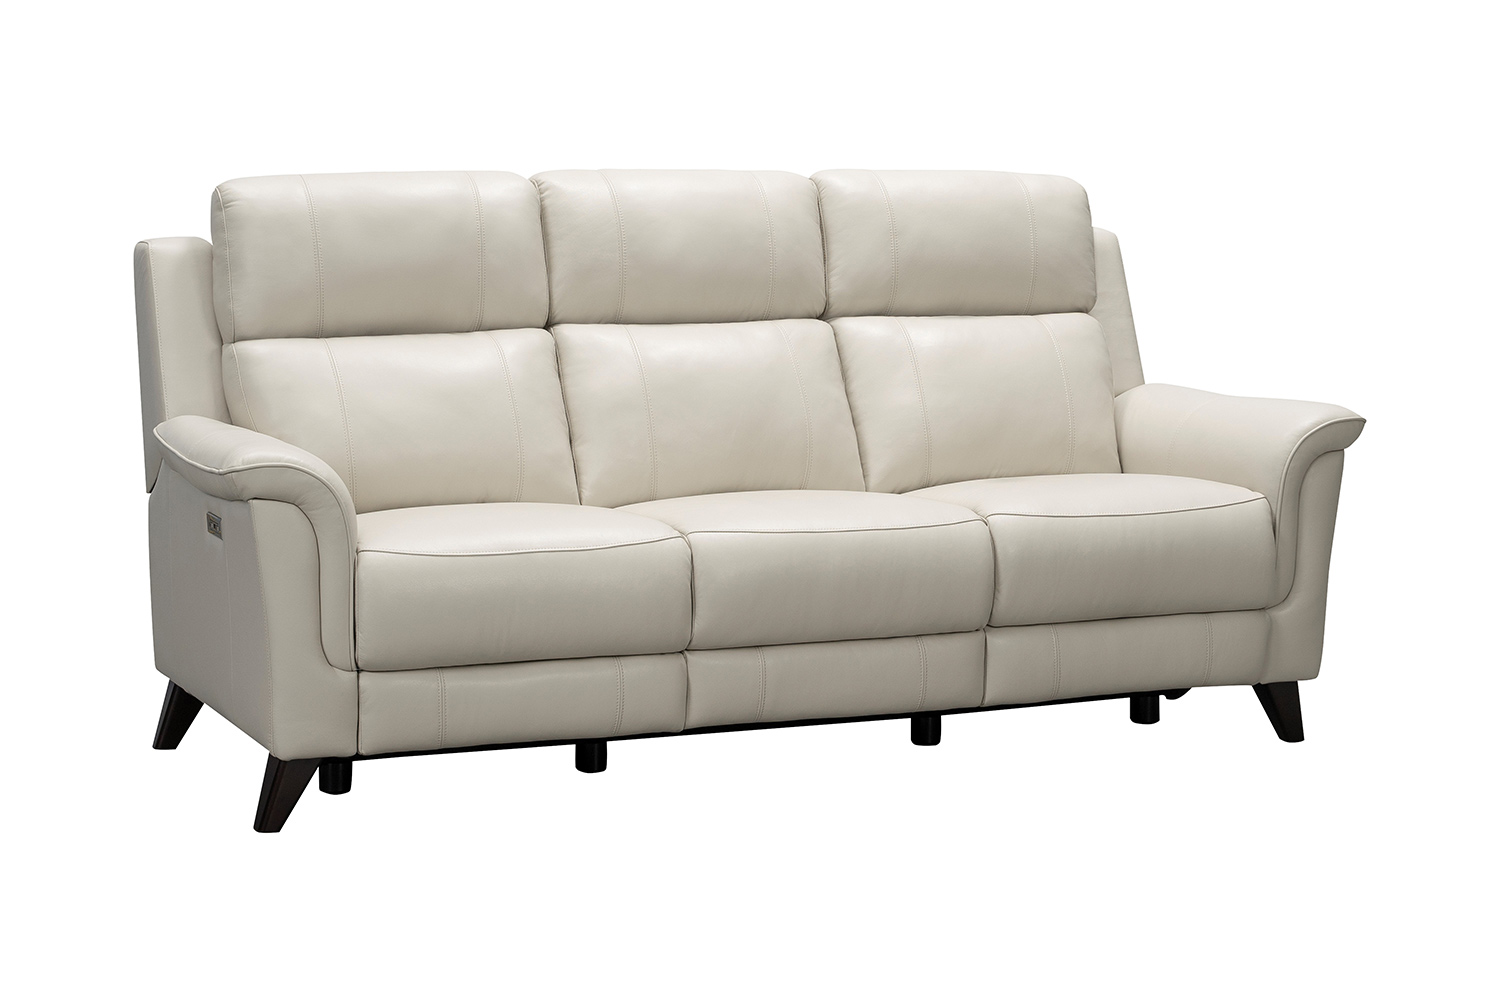 Barcalounger Kester Power Reclining Sofa with Power Head Rests - Laurel Cream/Leather match